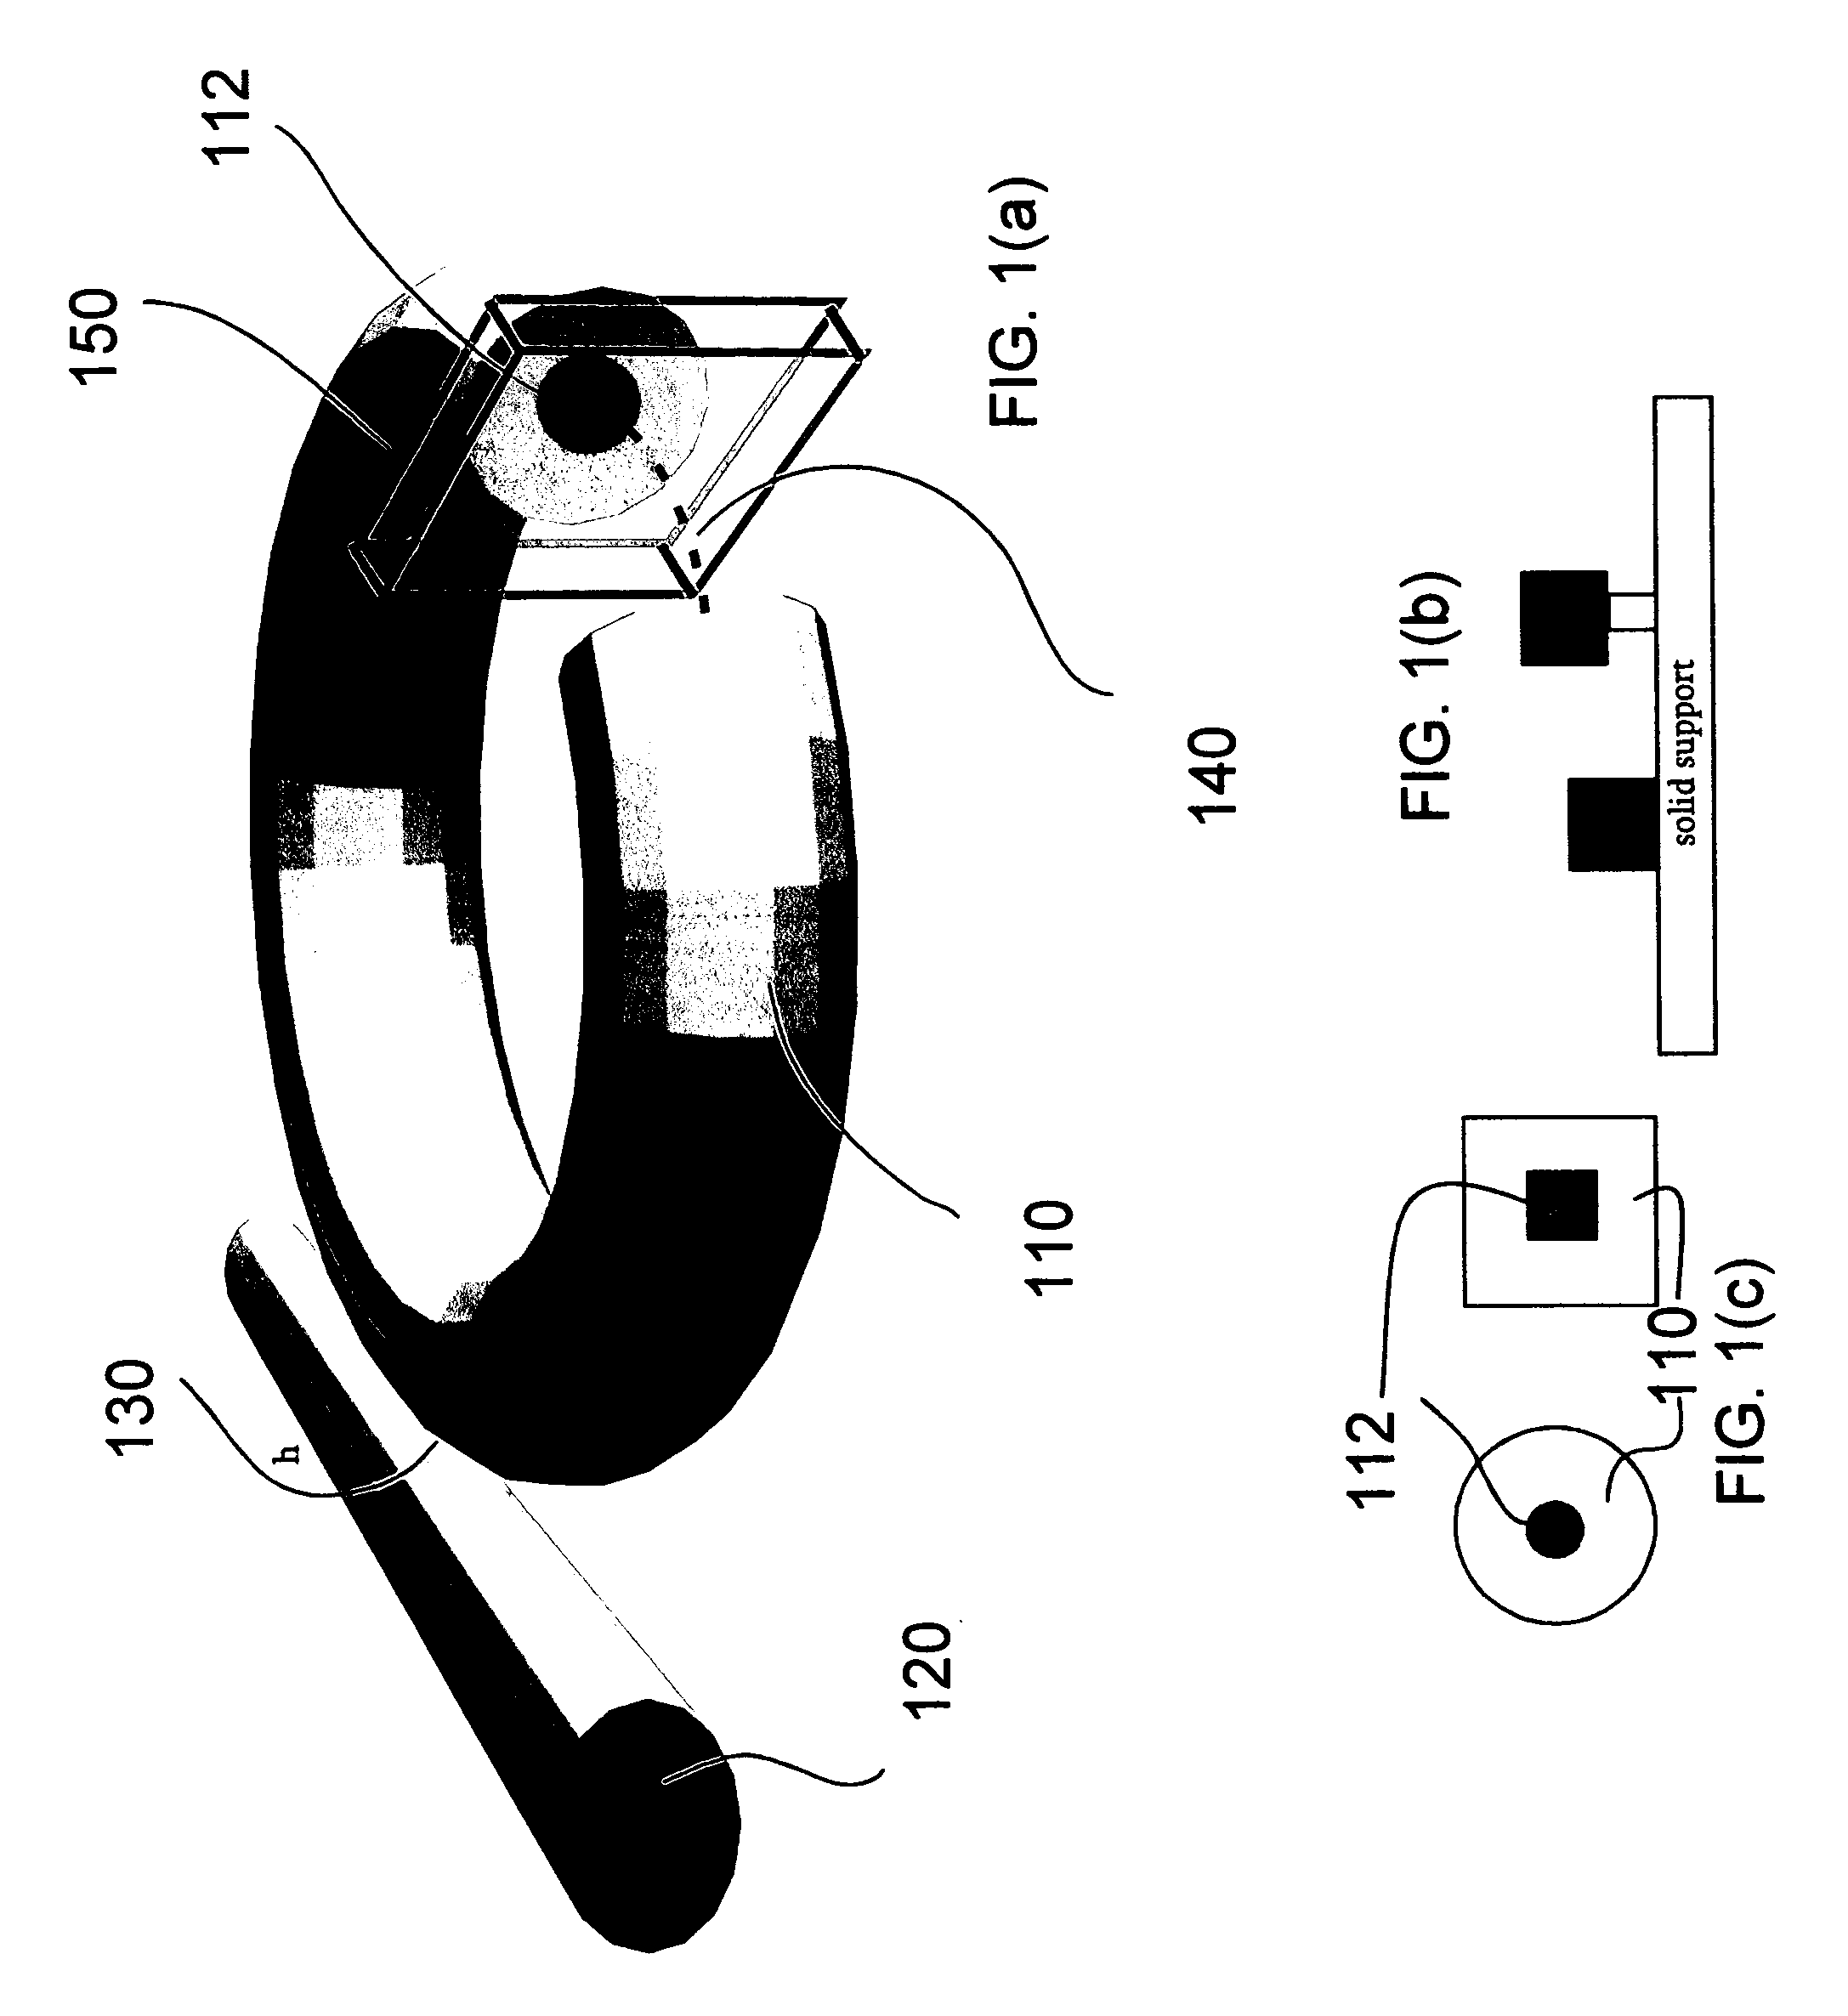 Method and apparatus for measuring and monitoring optical properties based on a ring-resonator